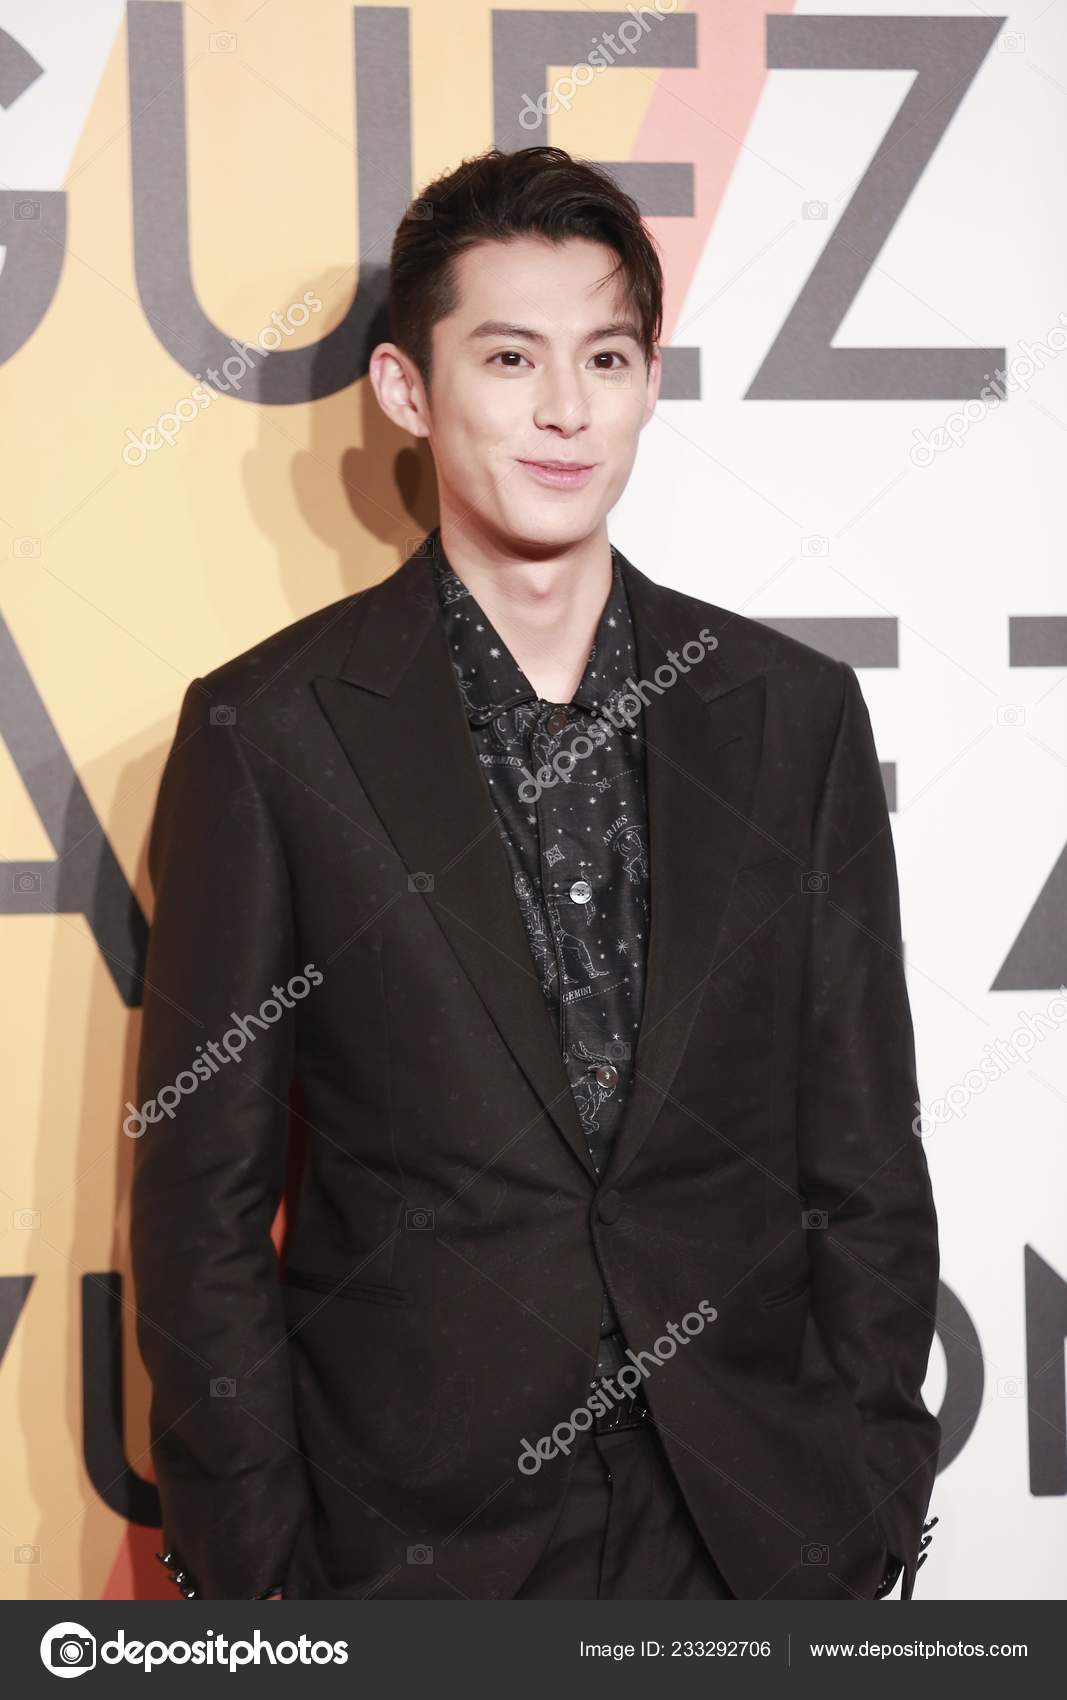 Does Dylan Wang Hedi Have A Girlfriend? He Was Once Photoed Dating